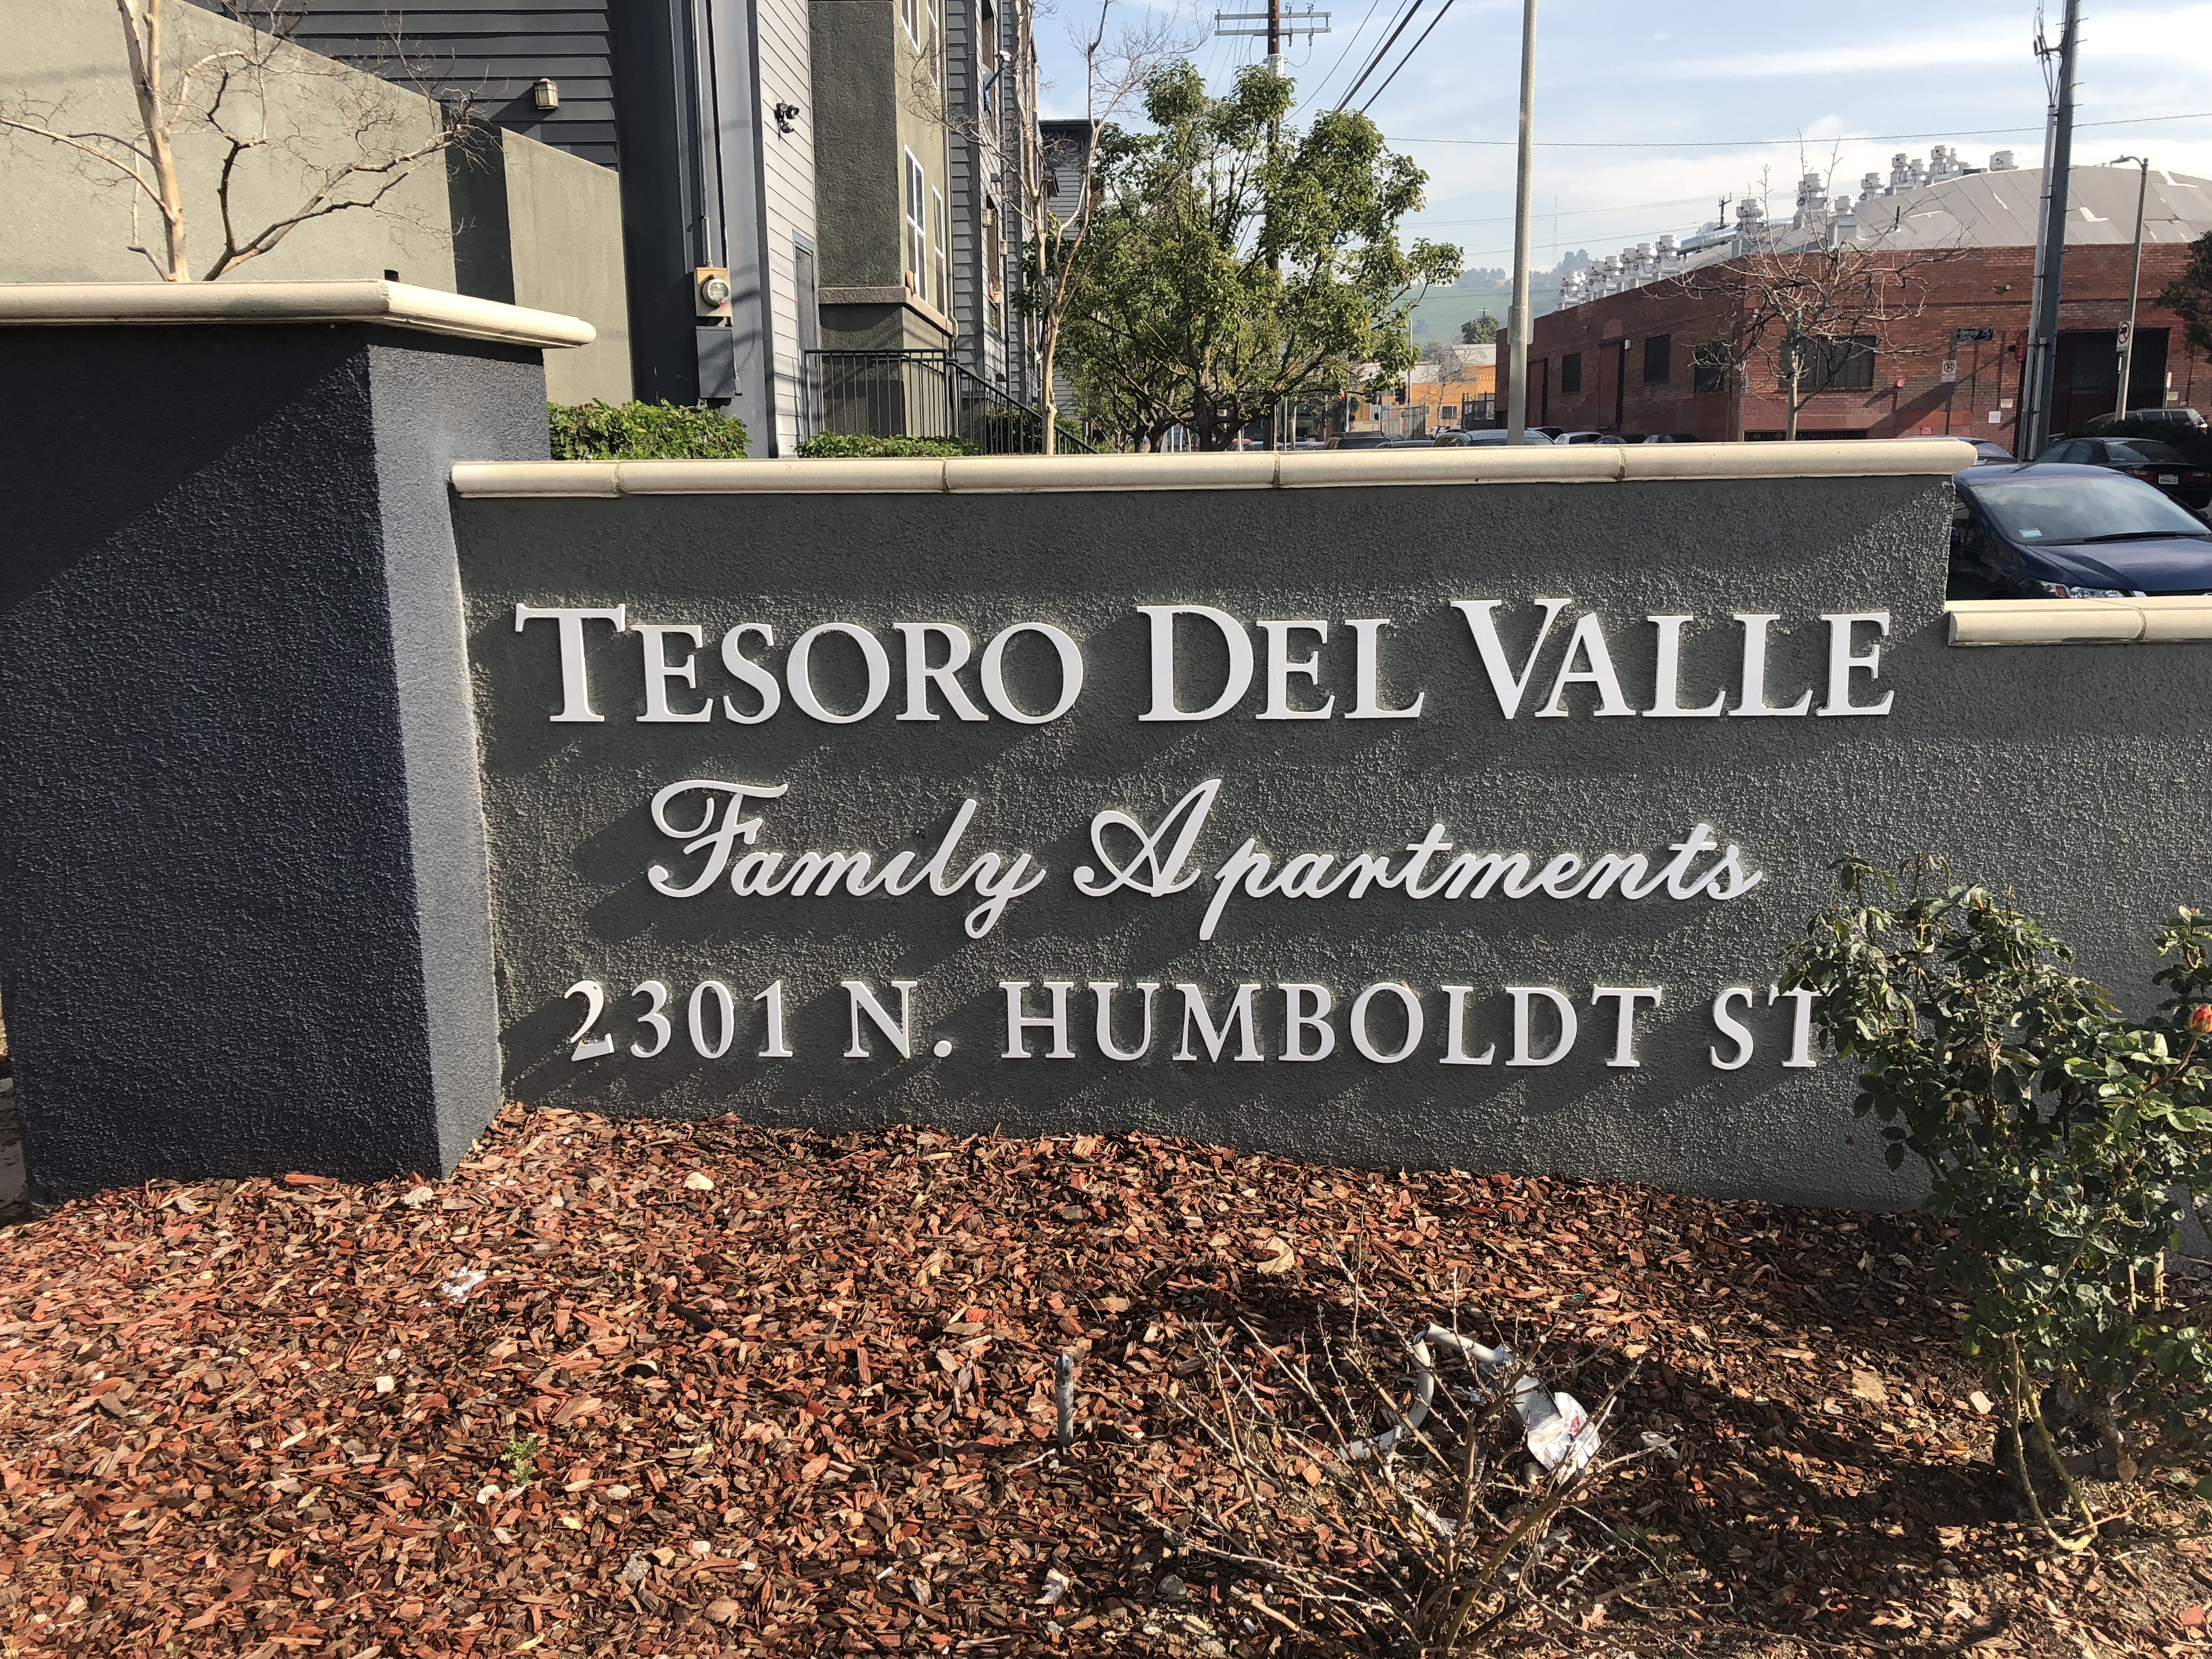 Monument-style wall displaying the name of the property: "Tesoro Del Valle Family Apartments, 2301 N. Humboldt St."